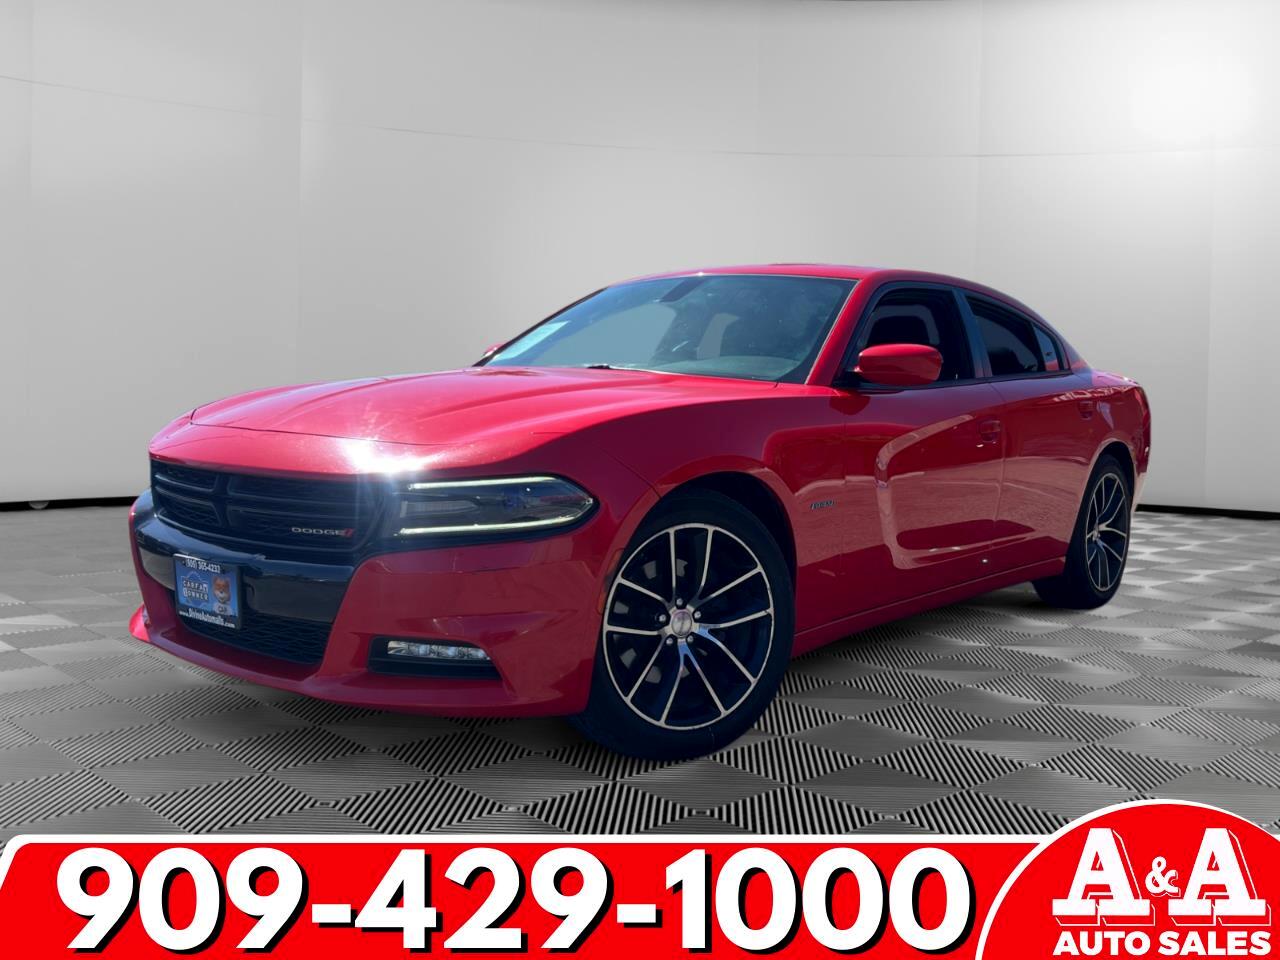 2016 Dodge Charger 4dr Sdn R/T RWD